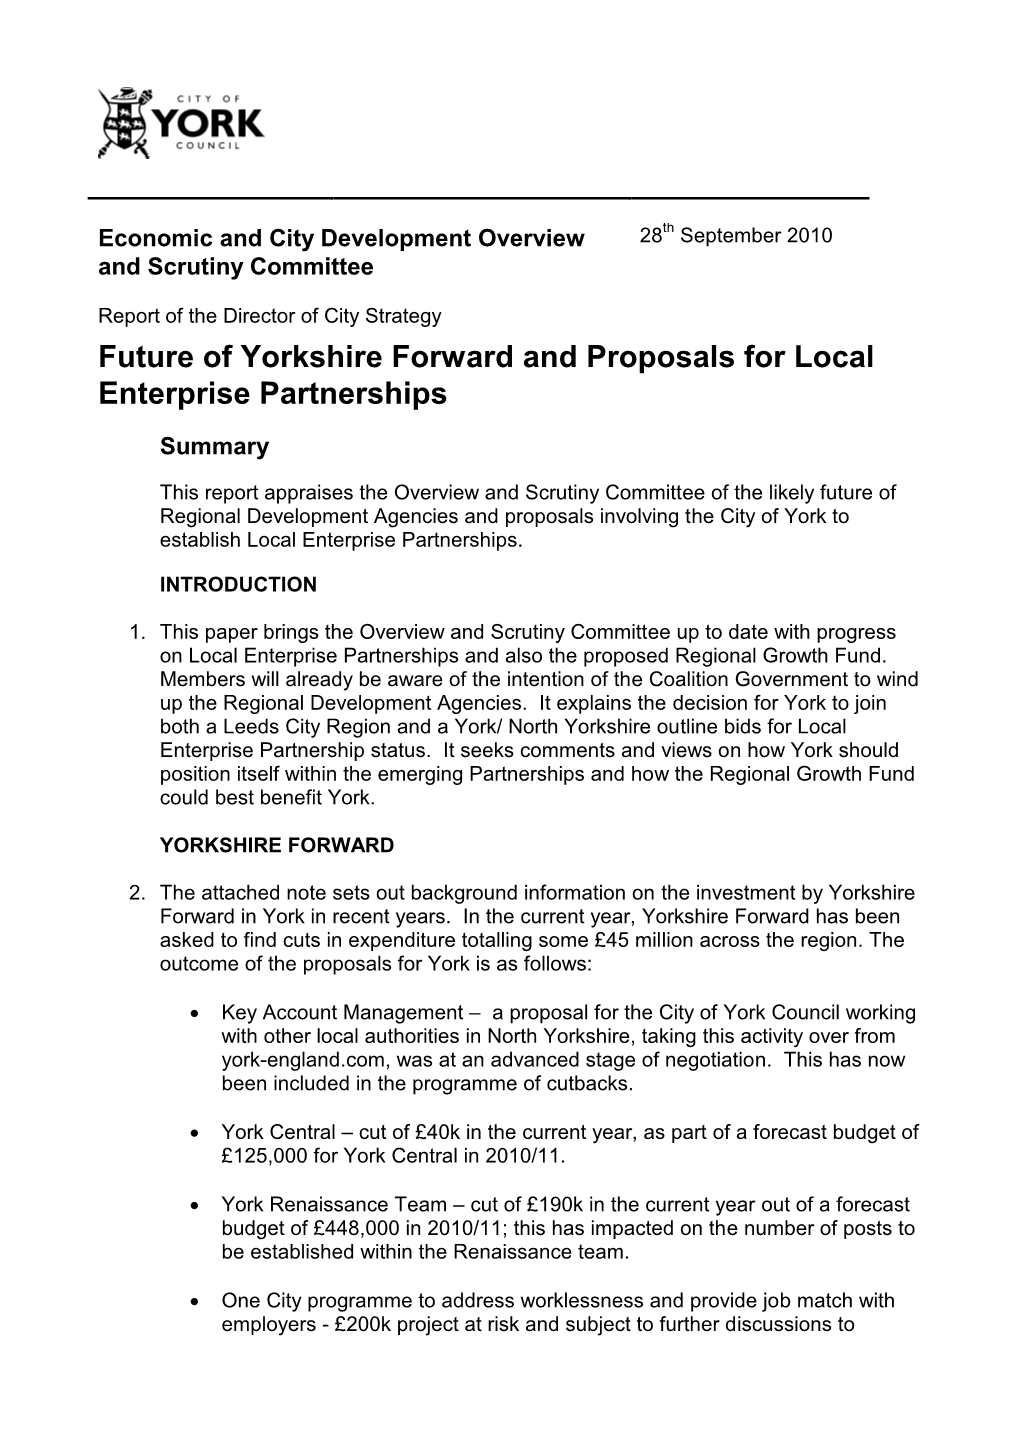 Future of Yorkshire Forward and Proposals for Local Enterprise Partnerships